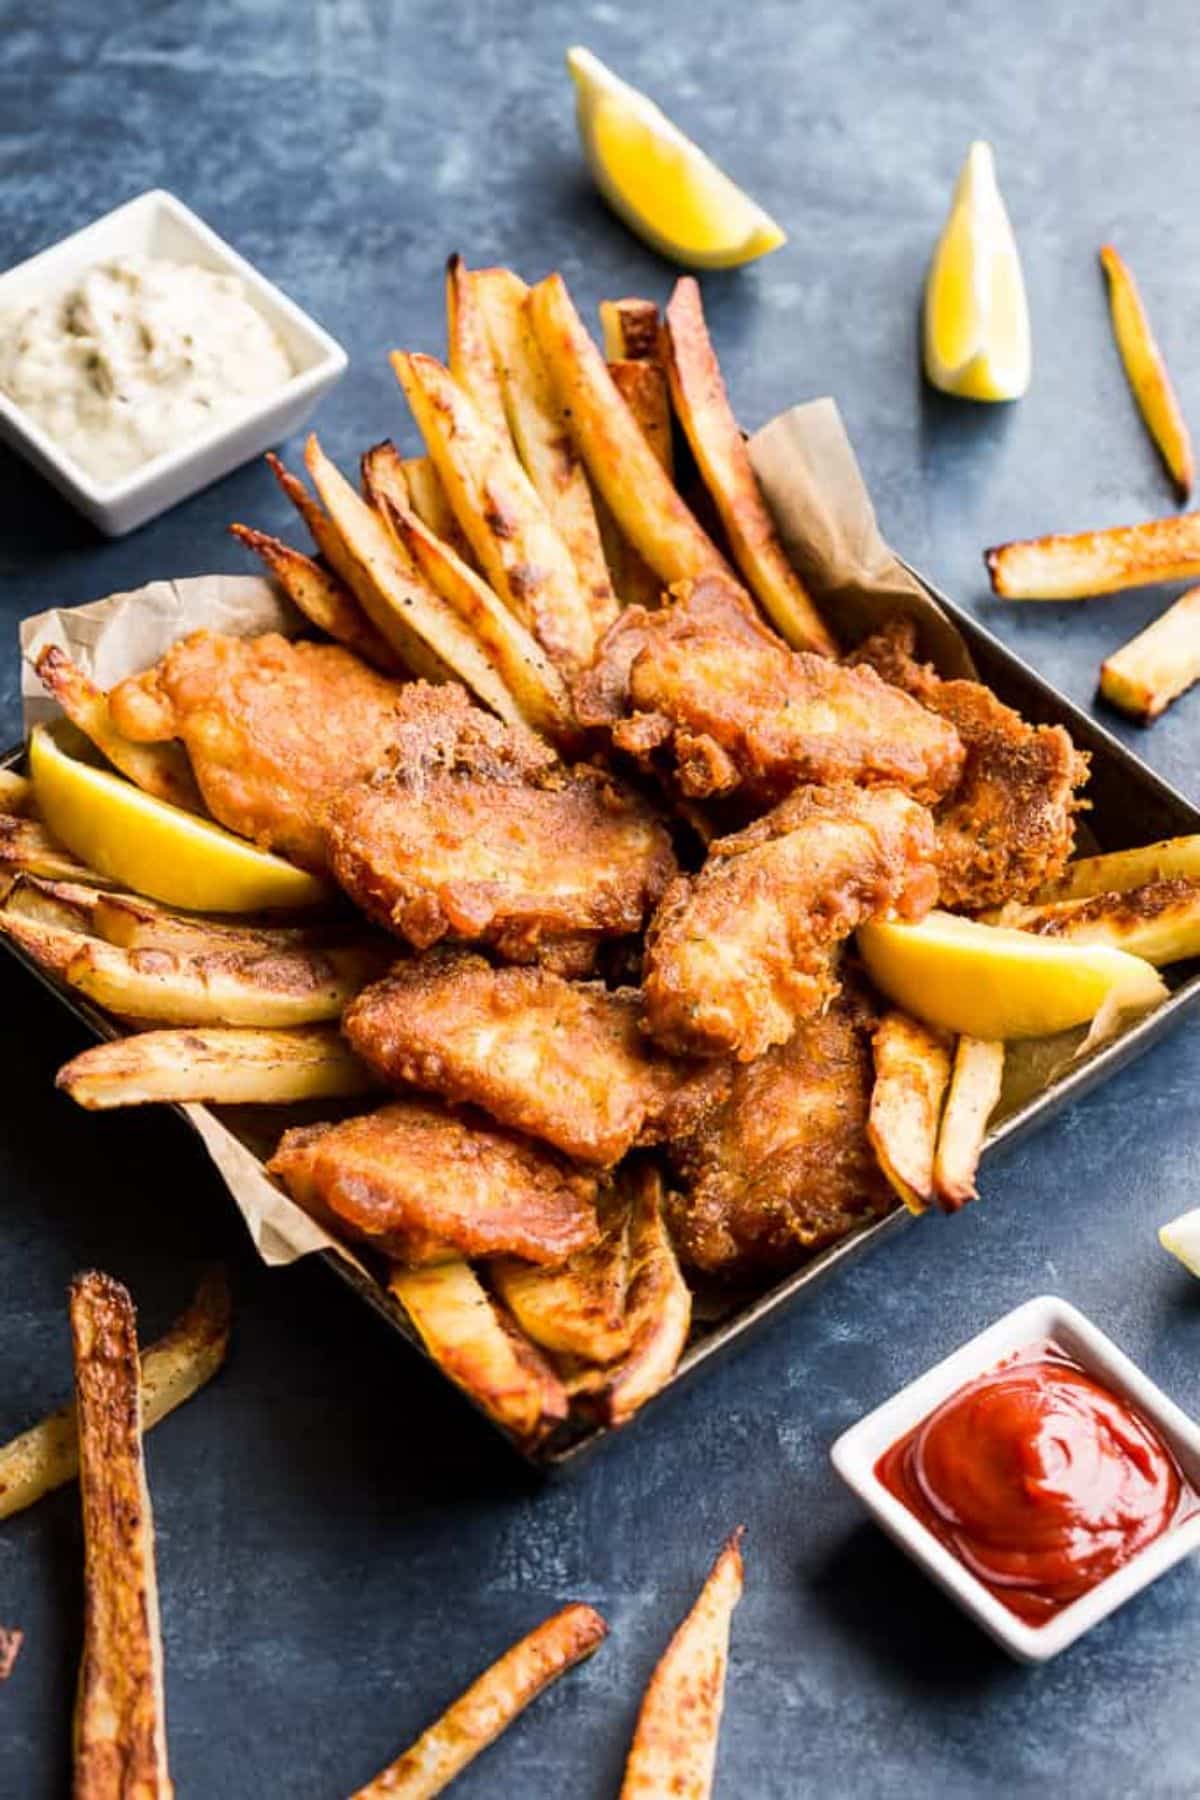 Crispy Gluten-Free Fish and Chips in a bowl.